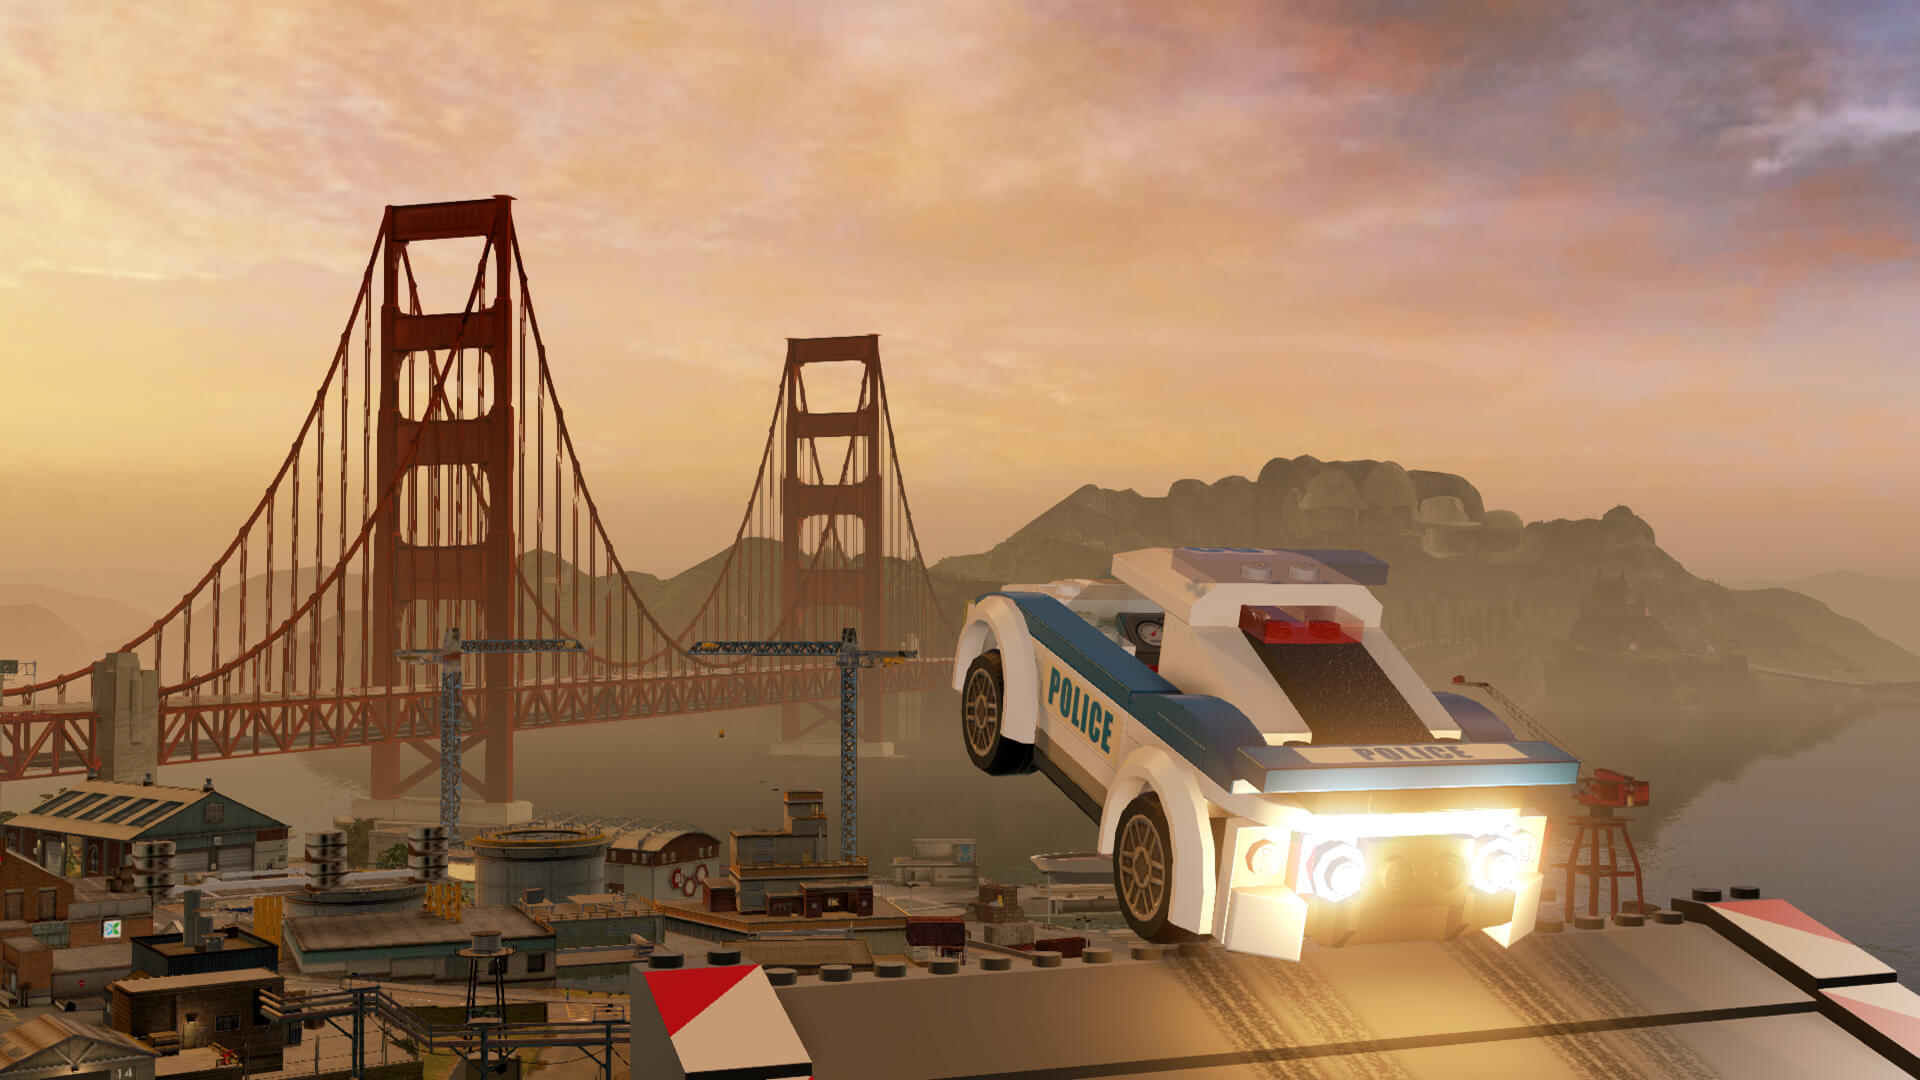 Chase McCain driving a police car in Lego City Undercover, likely one of the inspirations behind Lego 2K Drive